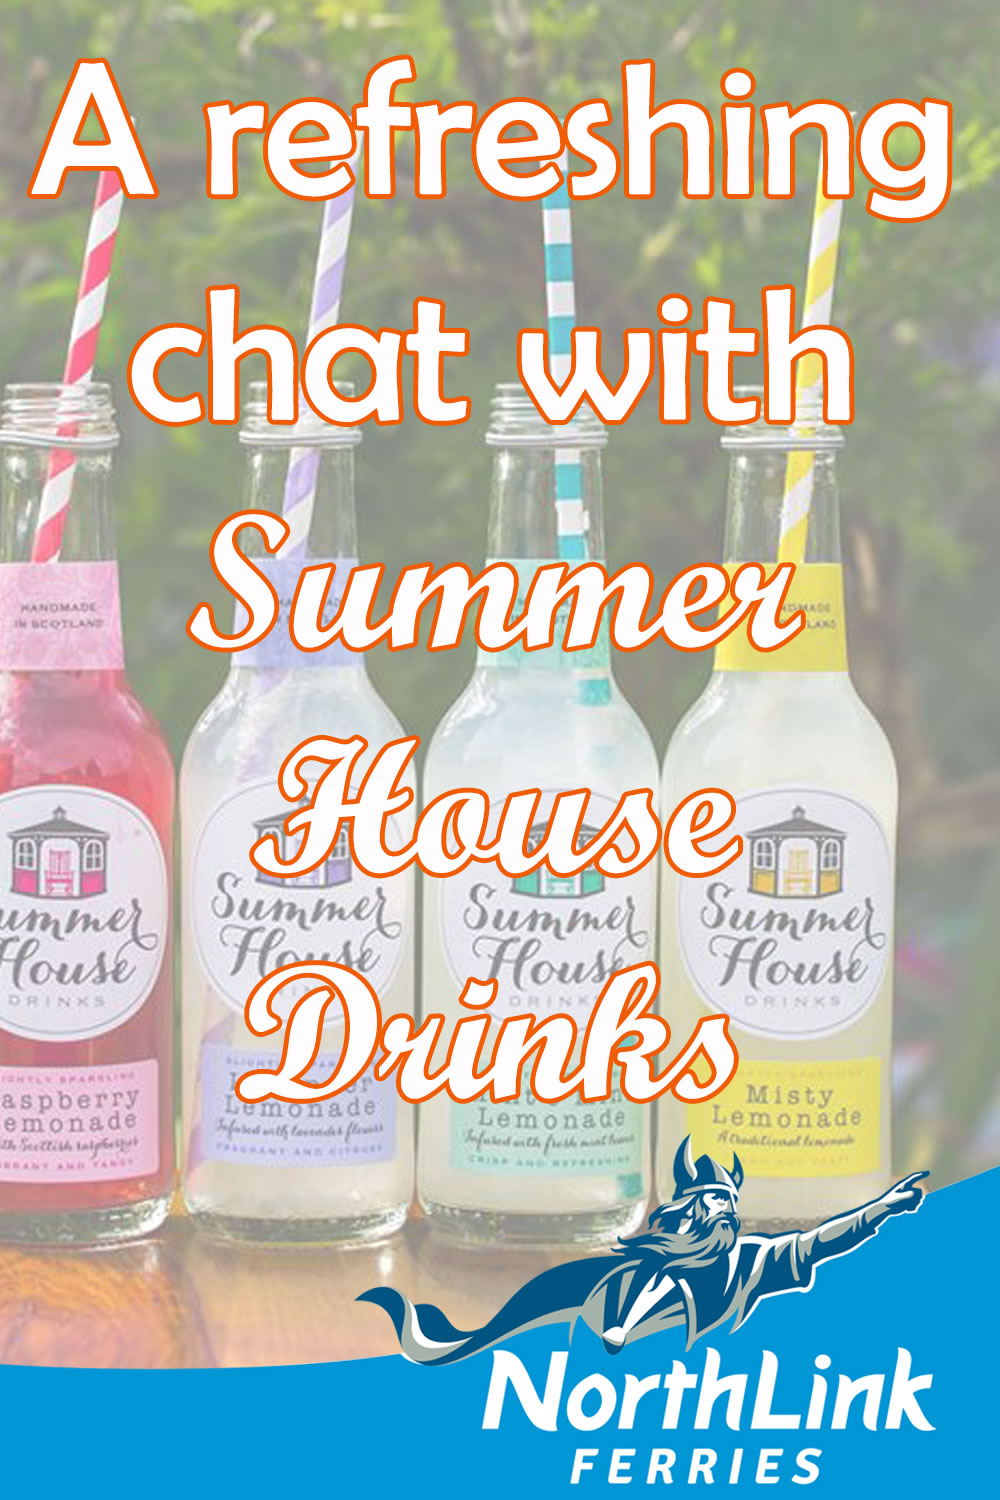 A refreshing chat with Summer House Drinks